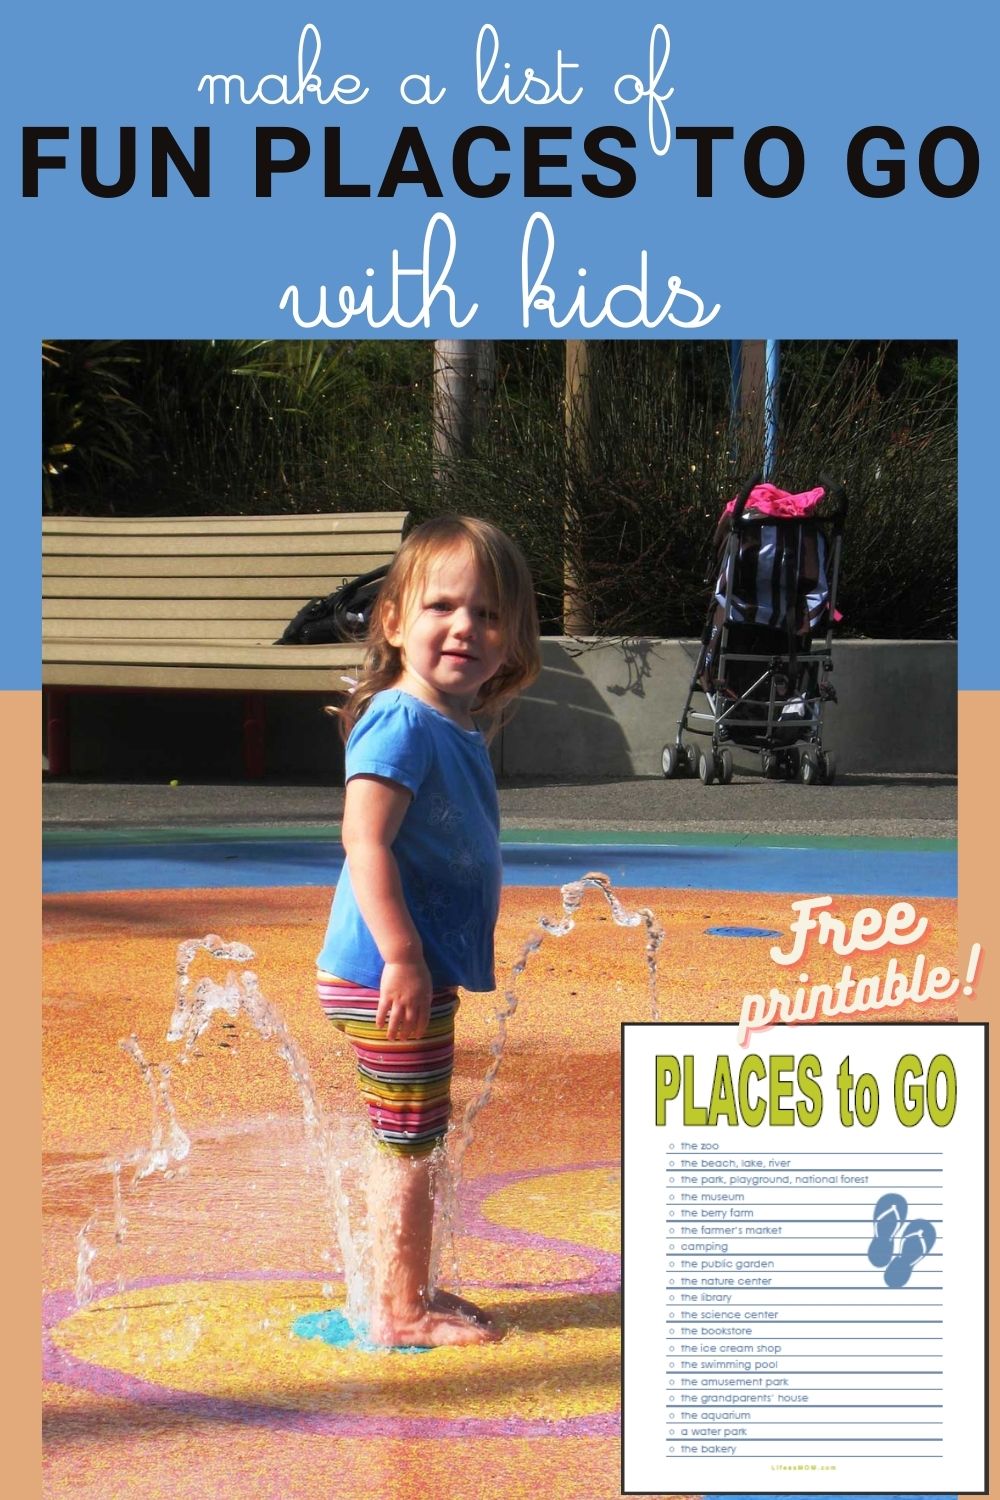 collage of free printable and image of girl splashing in water, with text overlay.